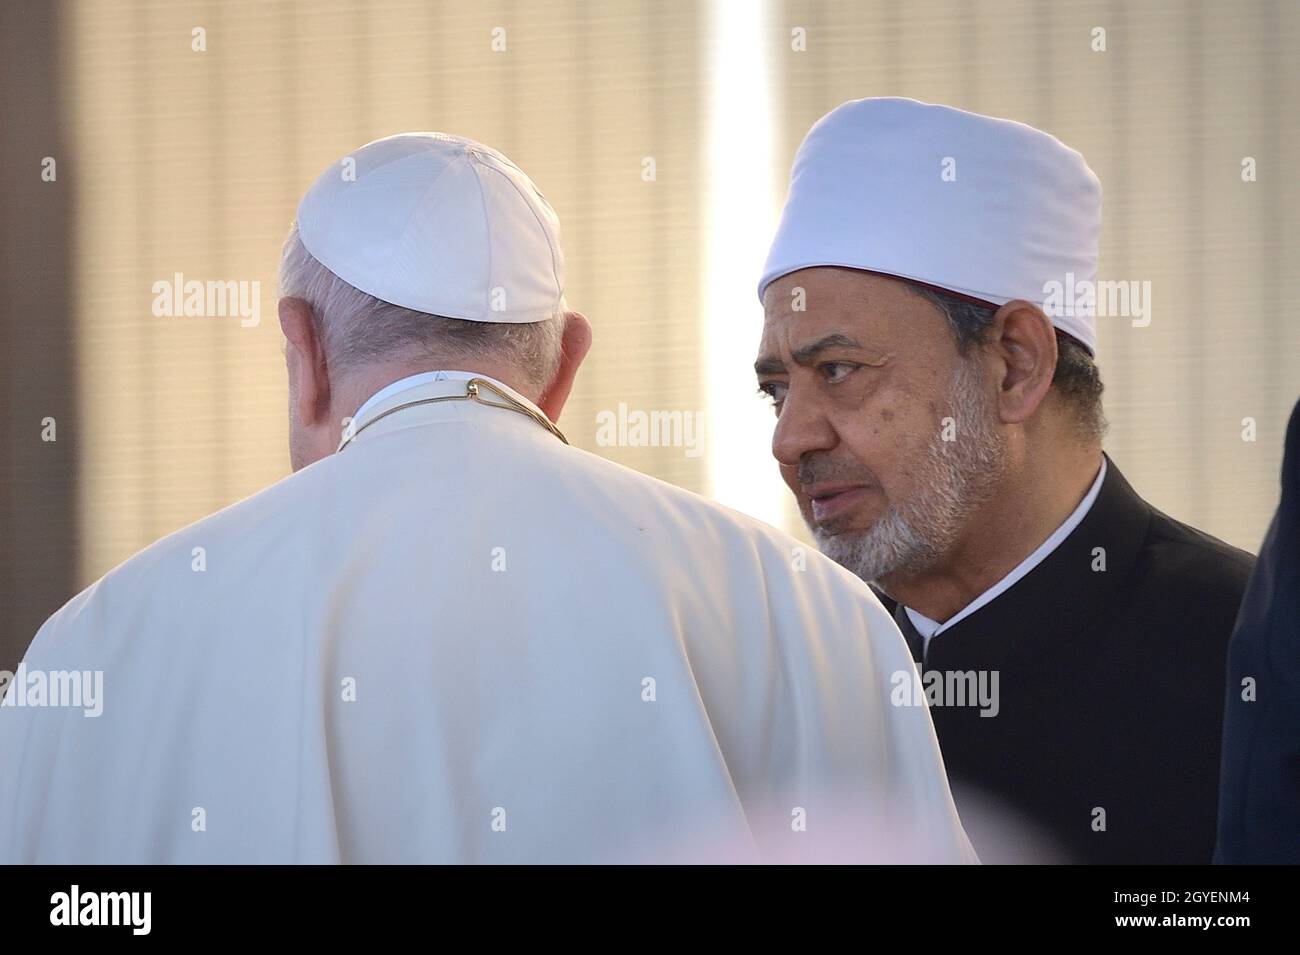 ROME, ITALY - OCTOBER 07: Pope Francis and grand imam of Al Azhar Sheikh Ahmed al-Tayeb chats during at Rome's Colosseum for an International Meeting for Peace with leaders of various religions and confessions on October 07, 2021 in Rome, Italy. The St. Egidio Community has held a two-day peace meeting in Rome which was attended by numerous faith leaders from across the globe. s Brothers, Future Earth', the event sa Credit: dpa picture alliance/Alamy Live News Stock Photo